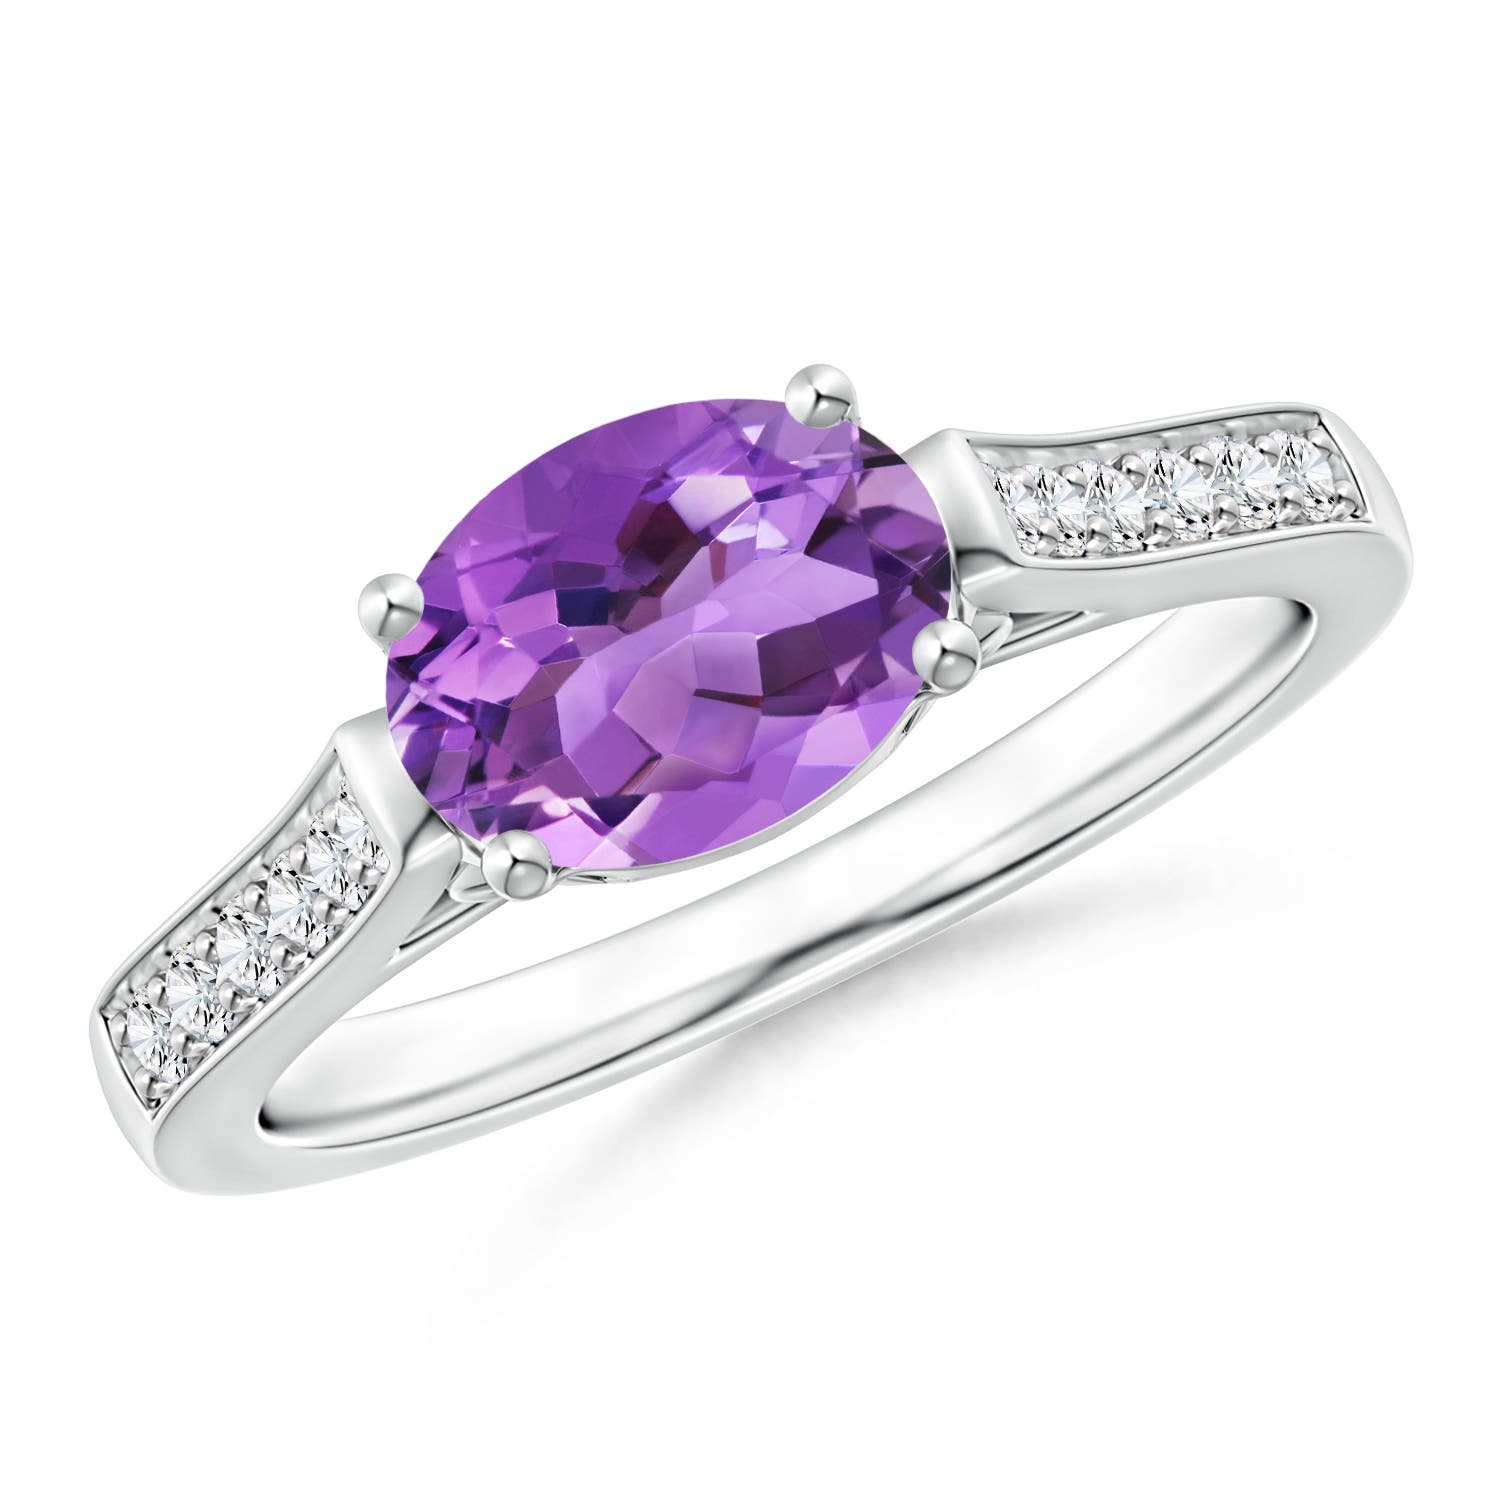 AA - Amethyst / 1.29 CT / 14 KT White Gold